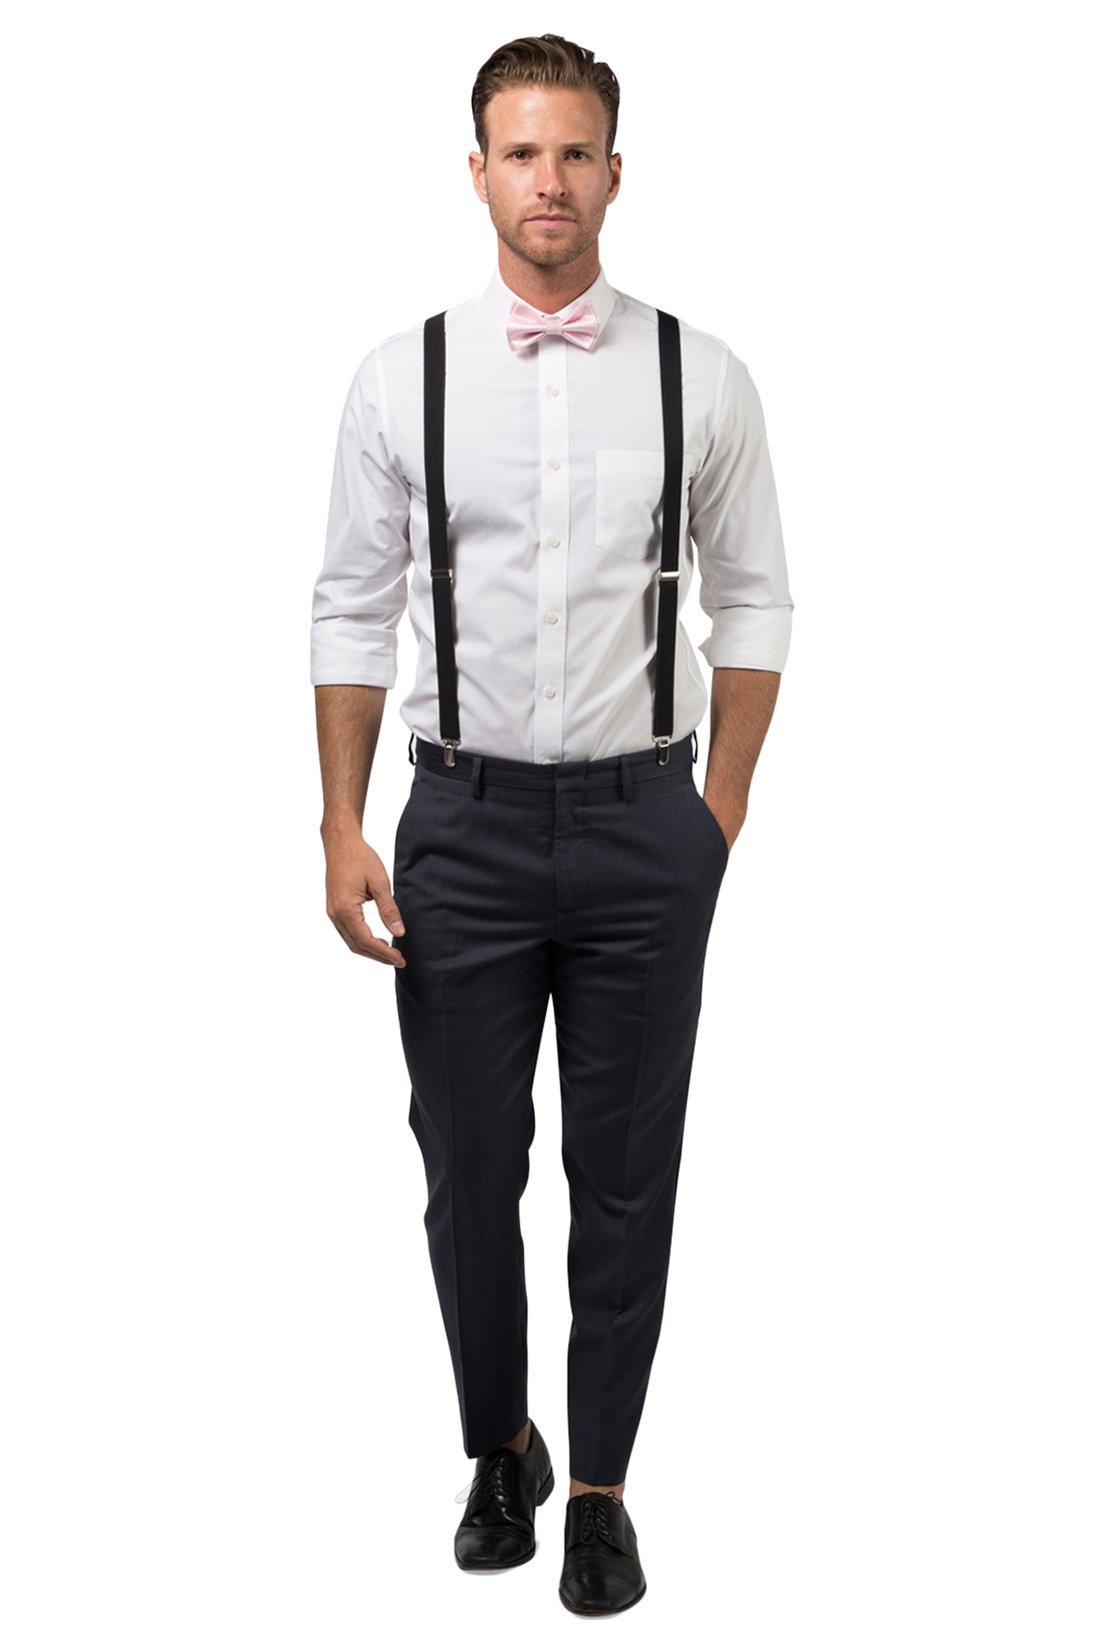 Buy Off white Coat with White Shirt and Black Pant for Boys Online